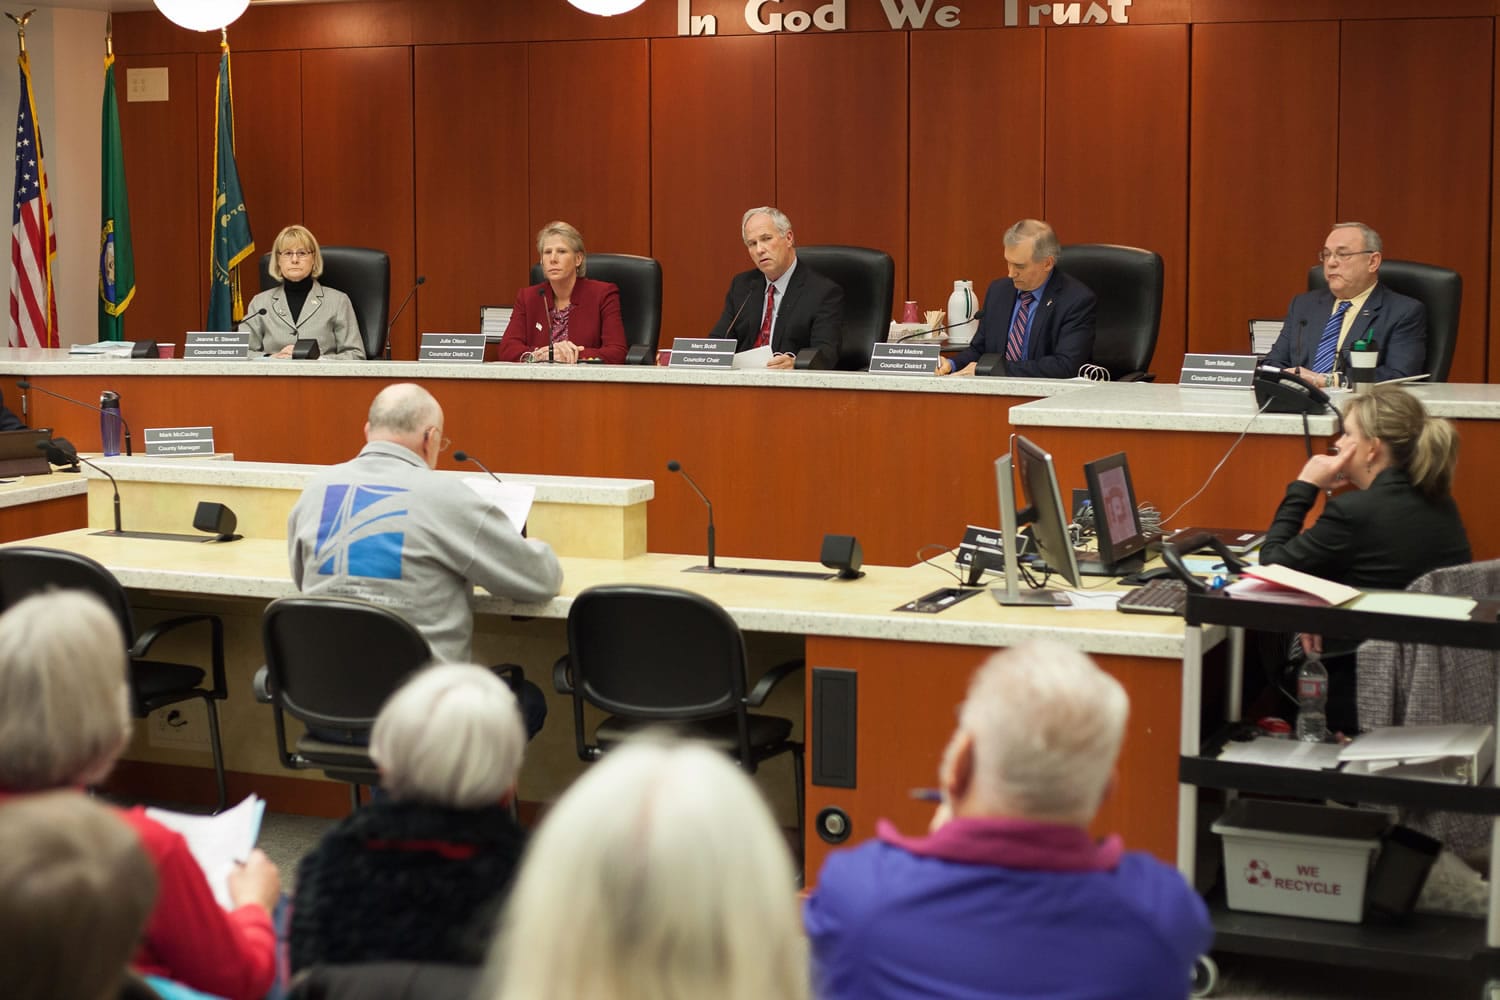 The newly expanded Clark County council held its first meeting earlier this month.